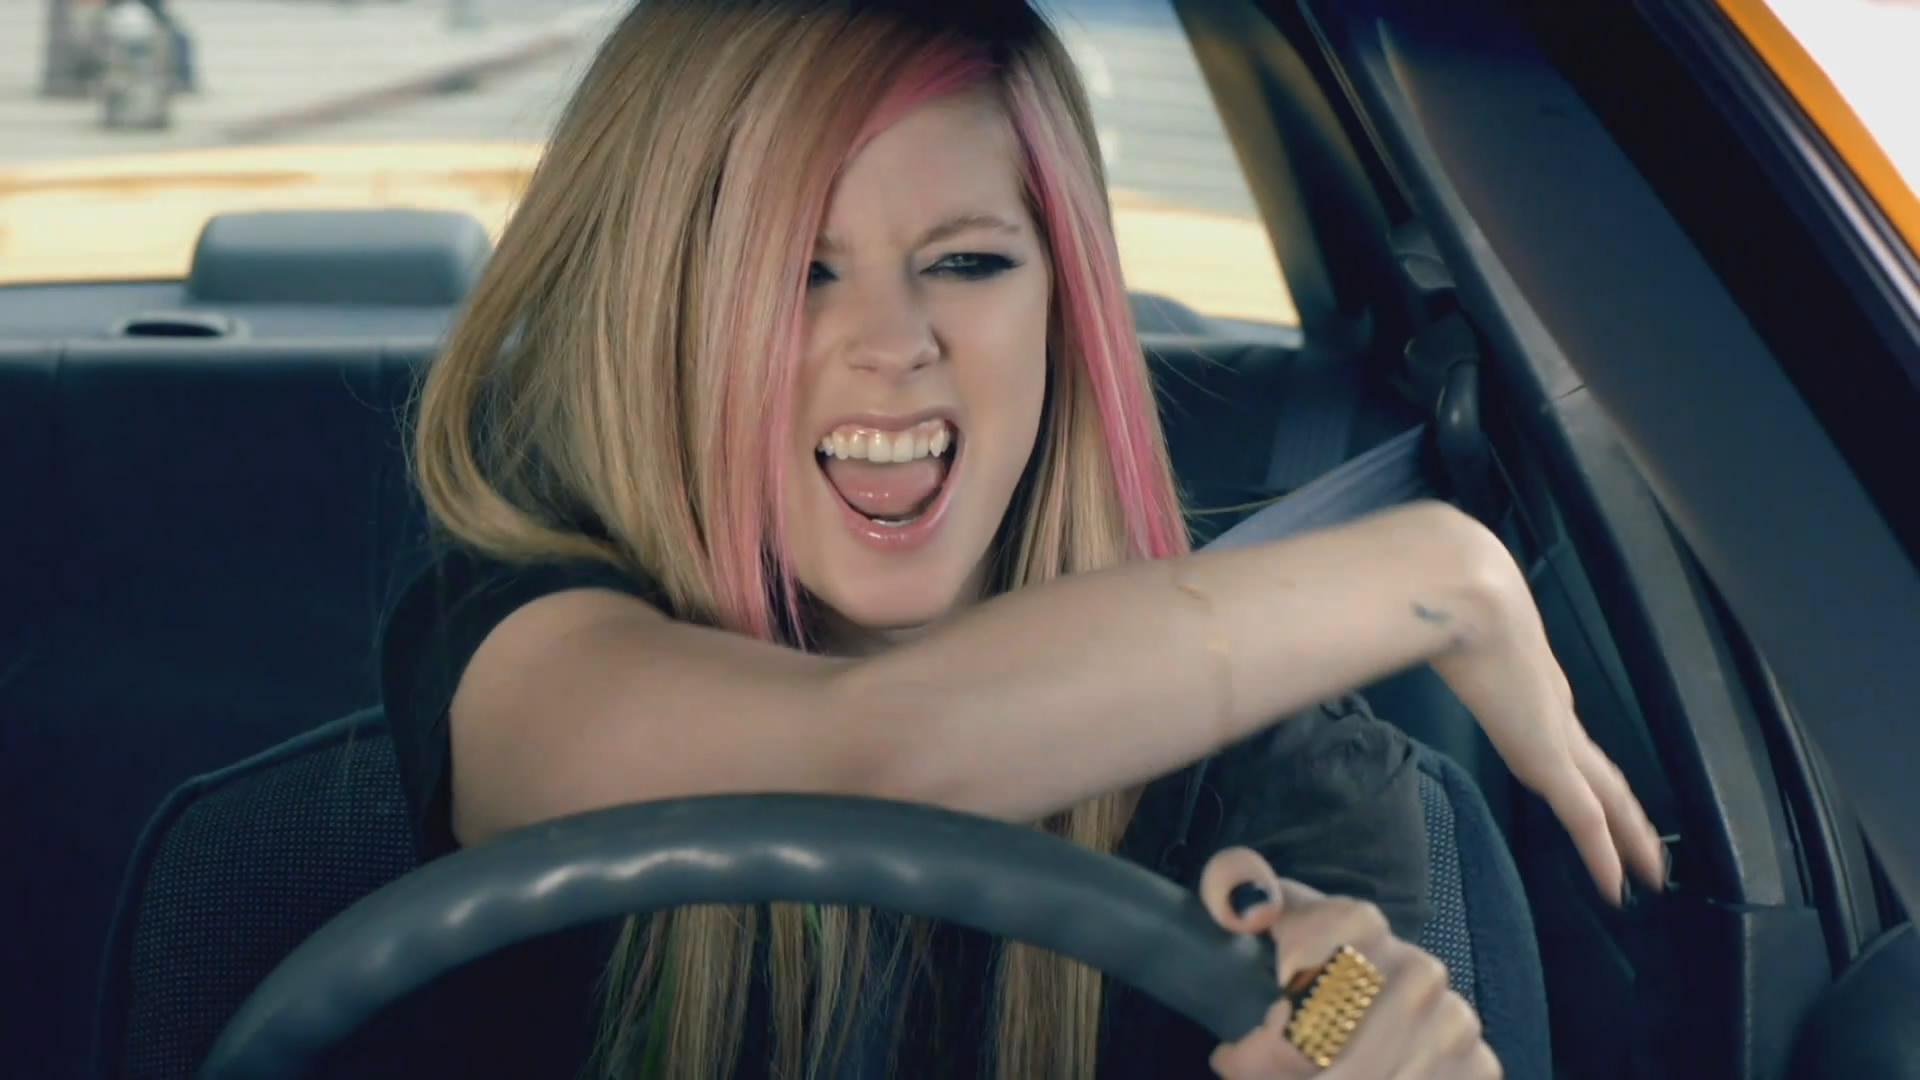 Avril Lavigne in Music Video: What The Hell